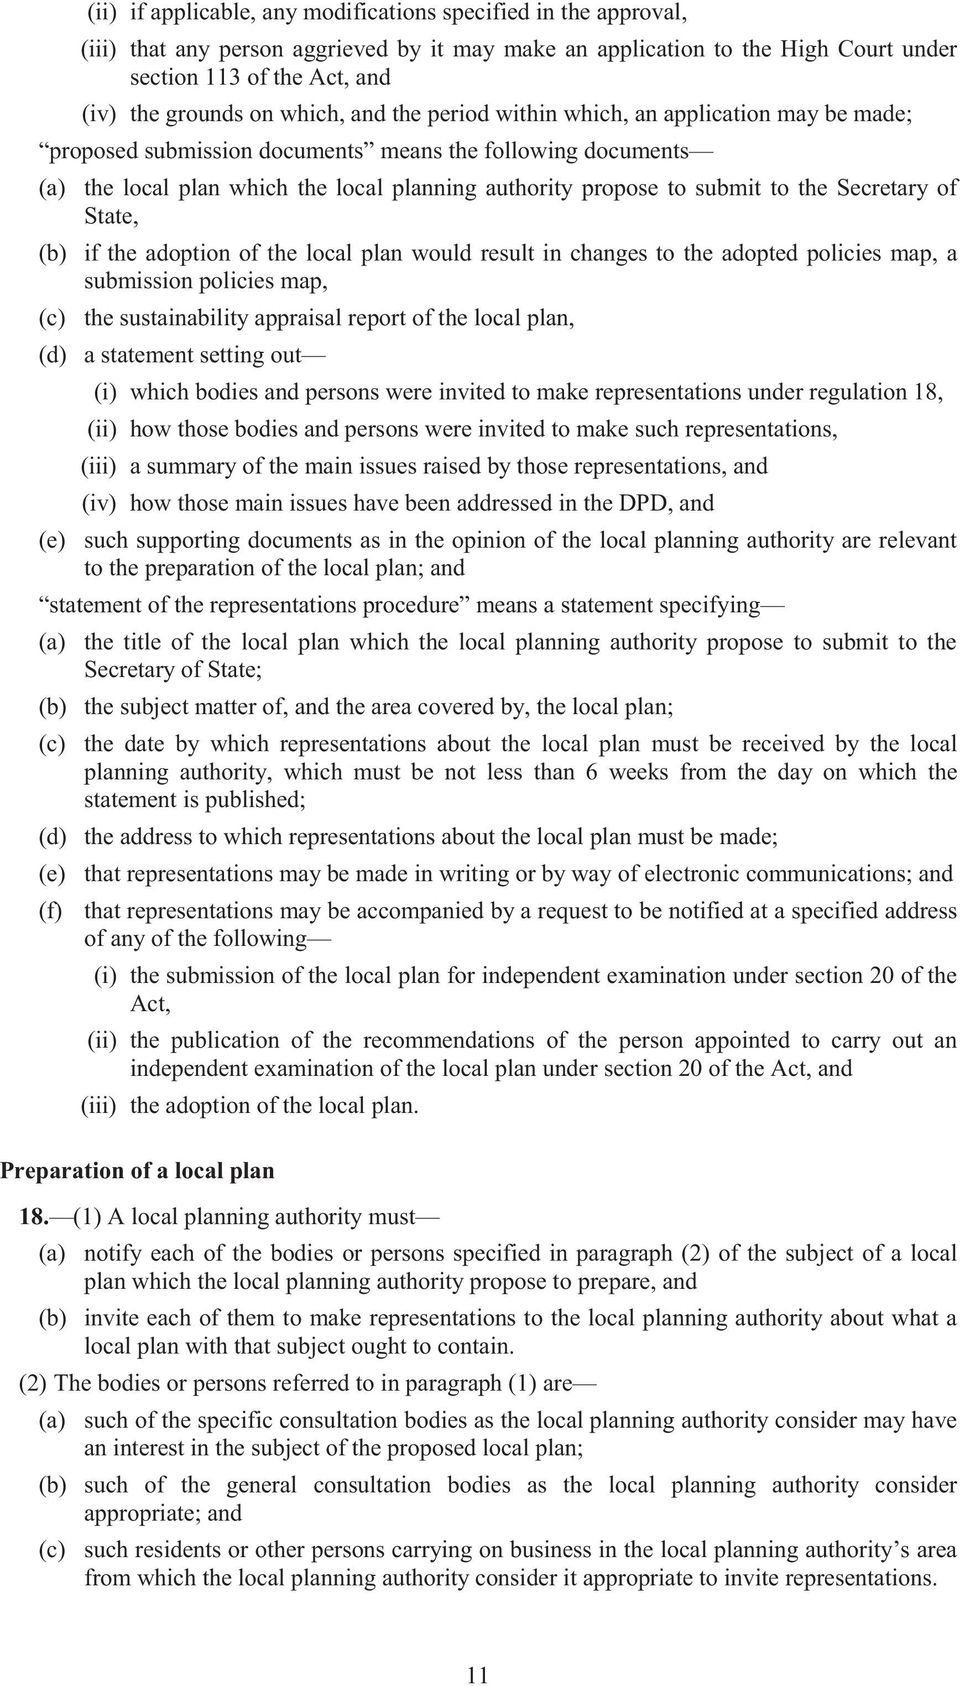 the Secretary of State, (b) if the adoption of the local plan would result in changes to the adopted policies map, a submission policies map, (c) the sustainability appraisal report of the local